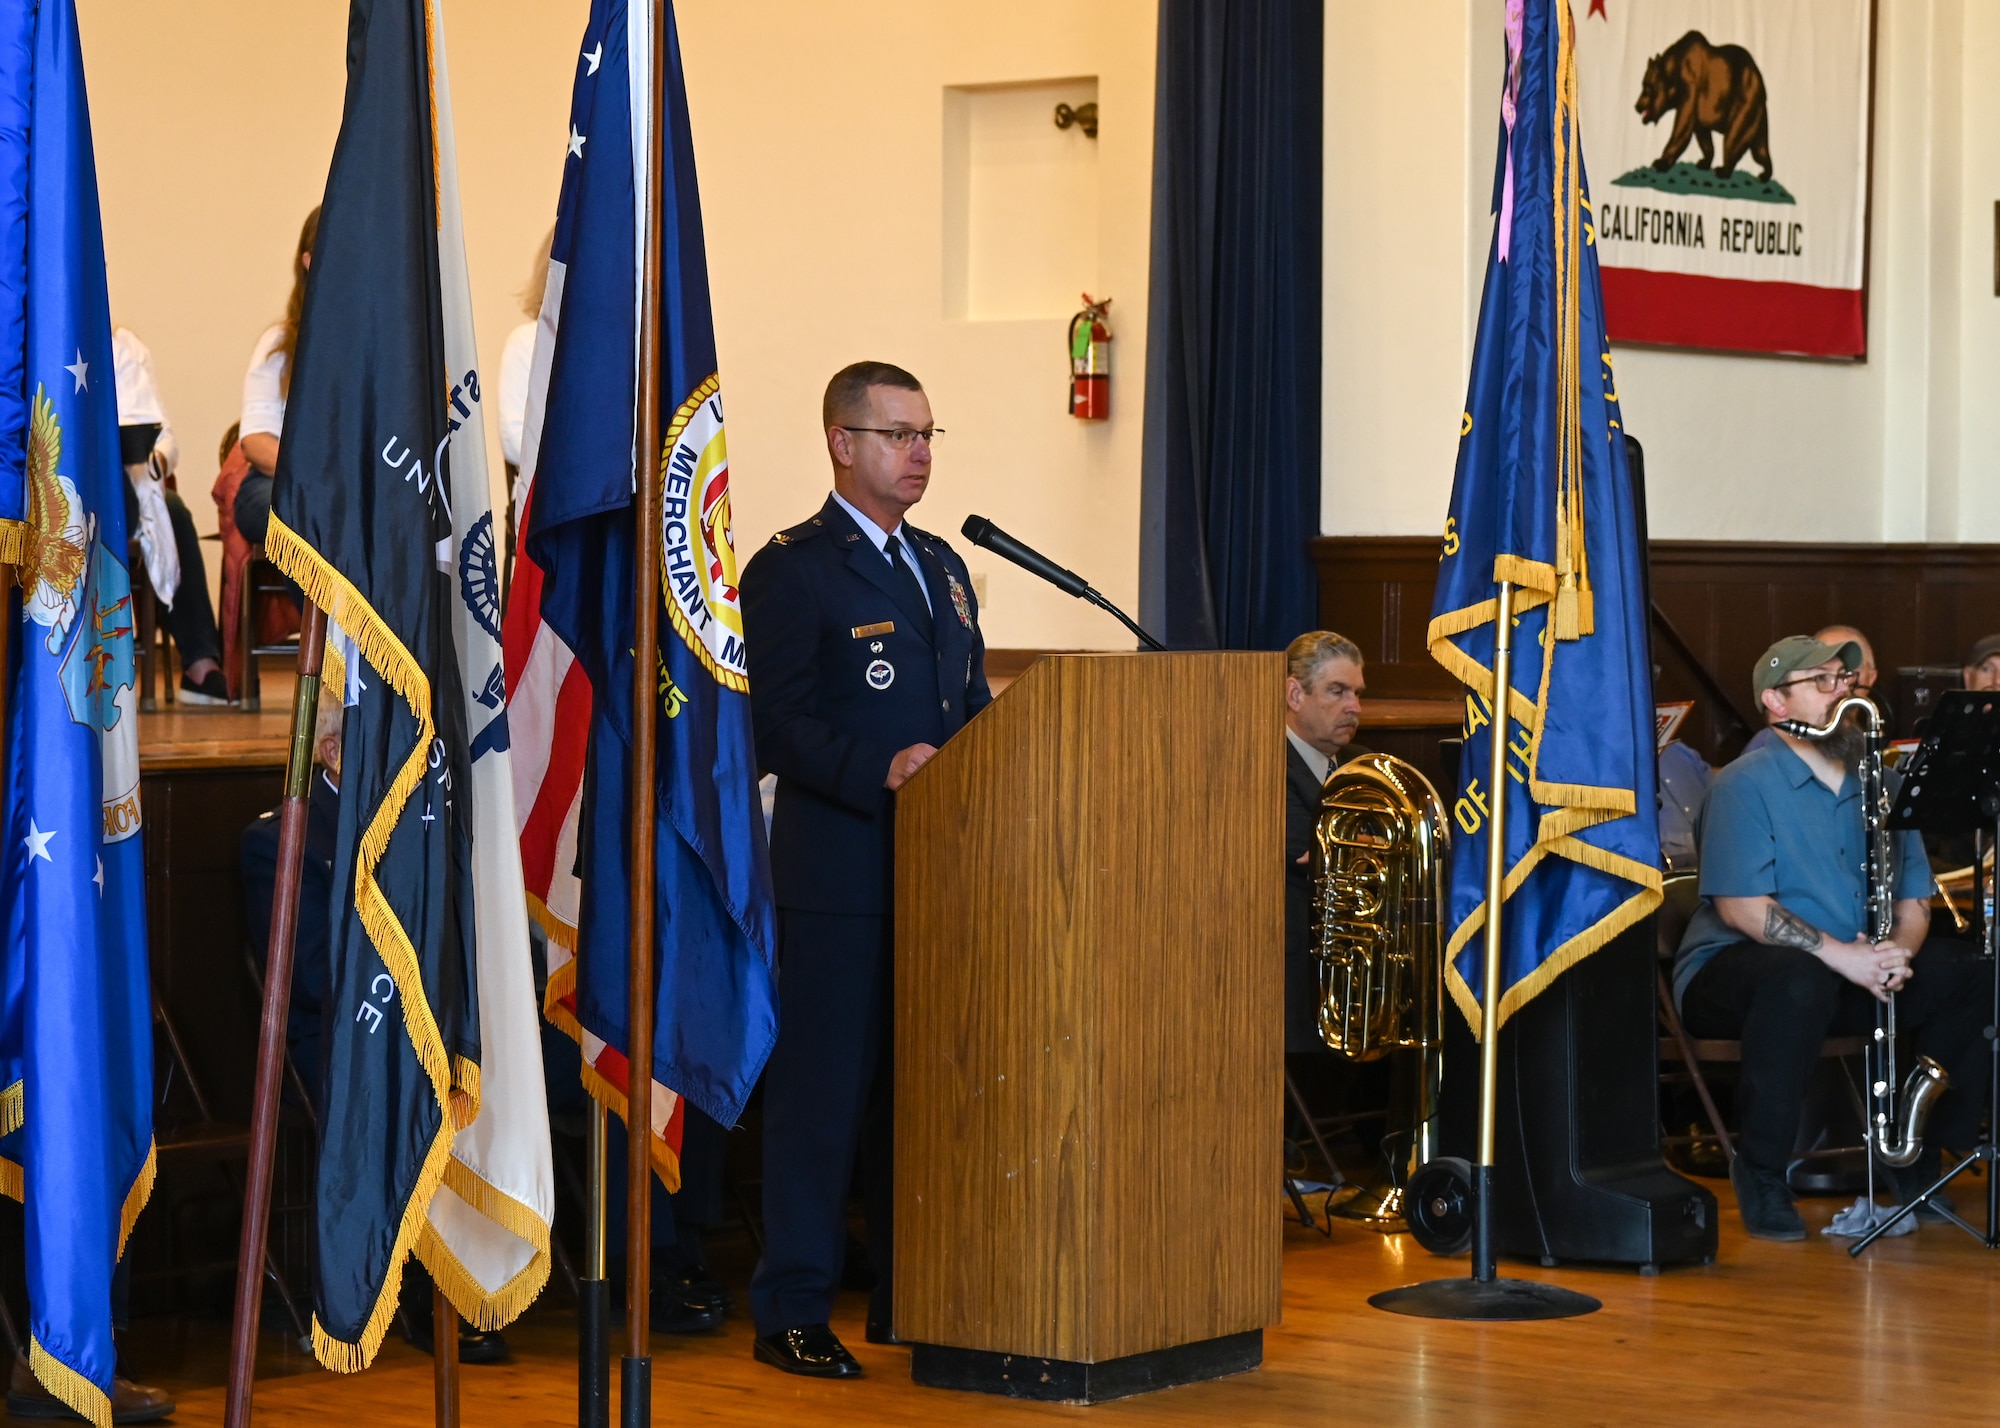 Space Launch Delta 30 vice commander, delivers a heartfelt speech to guests attending the Veterans Day ceremony at the Solvang Veterans Memorial Hall.